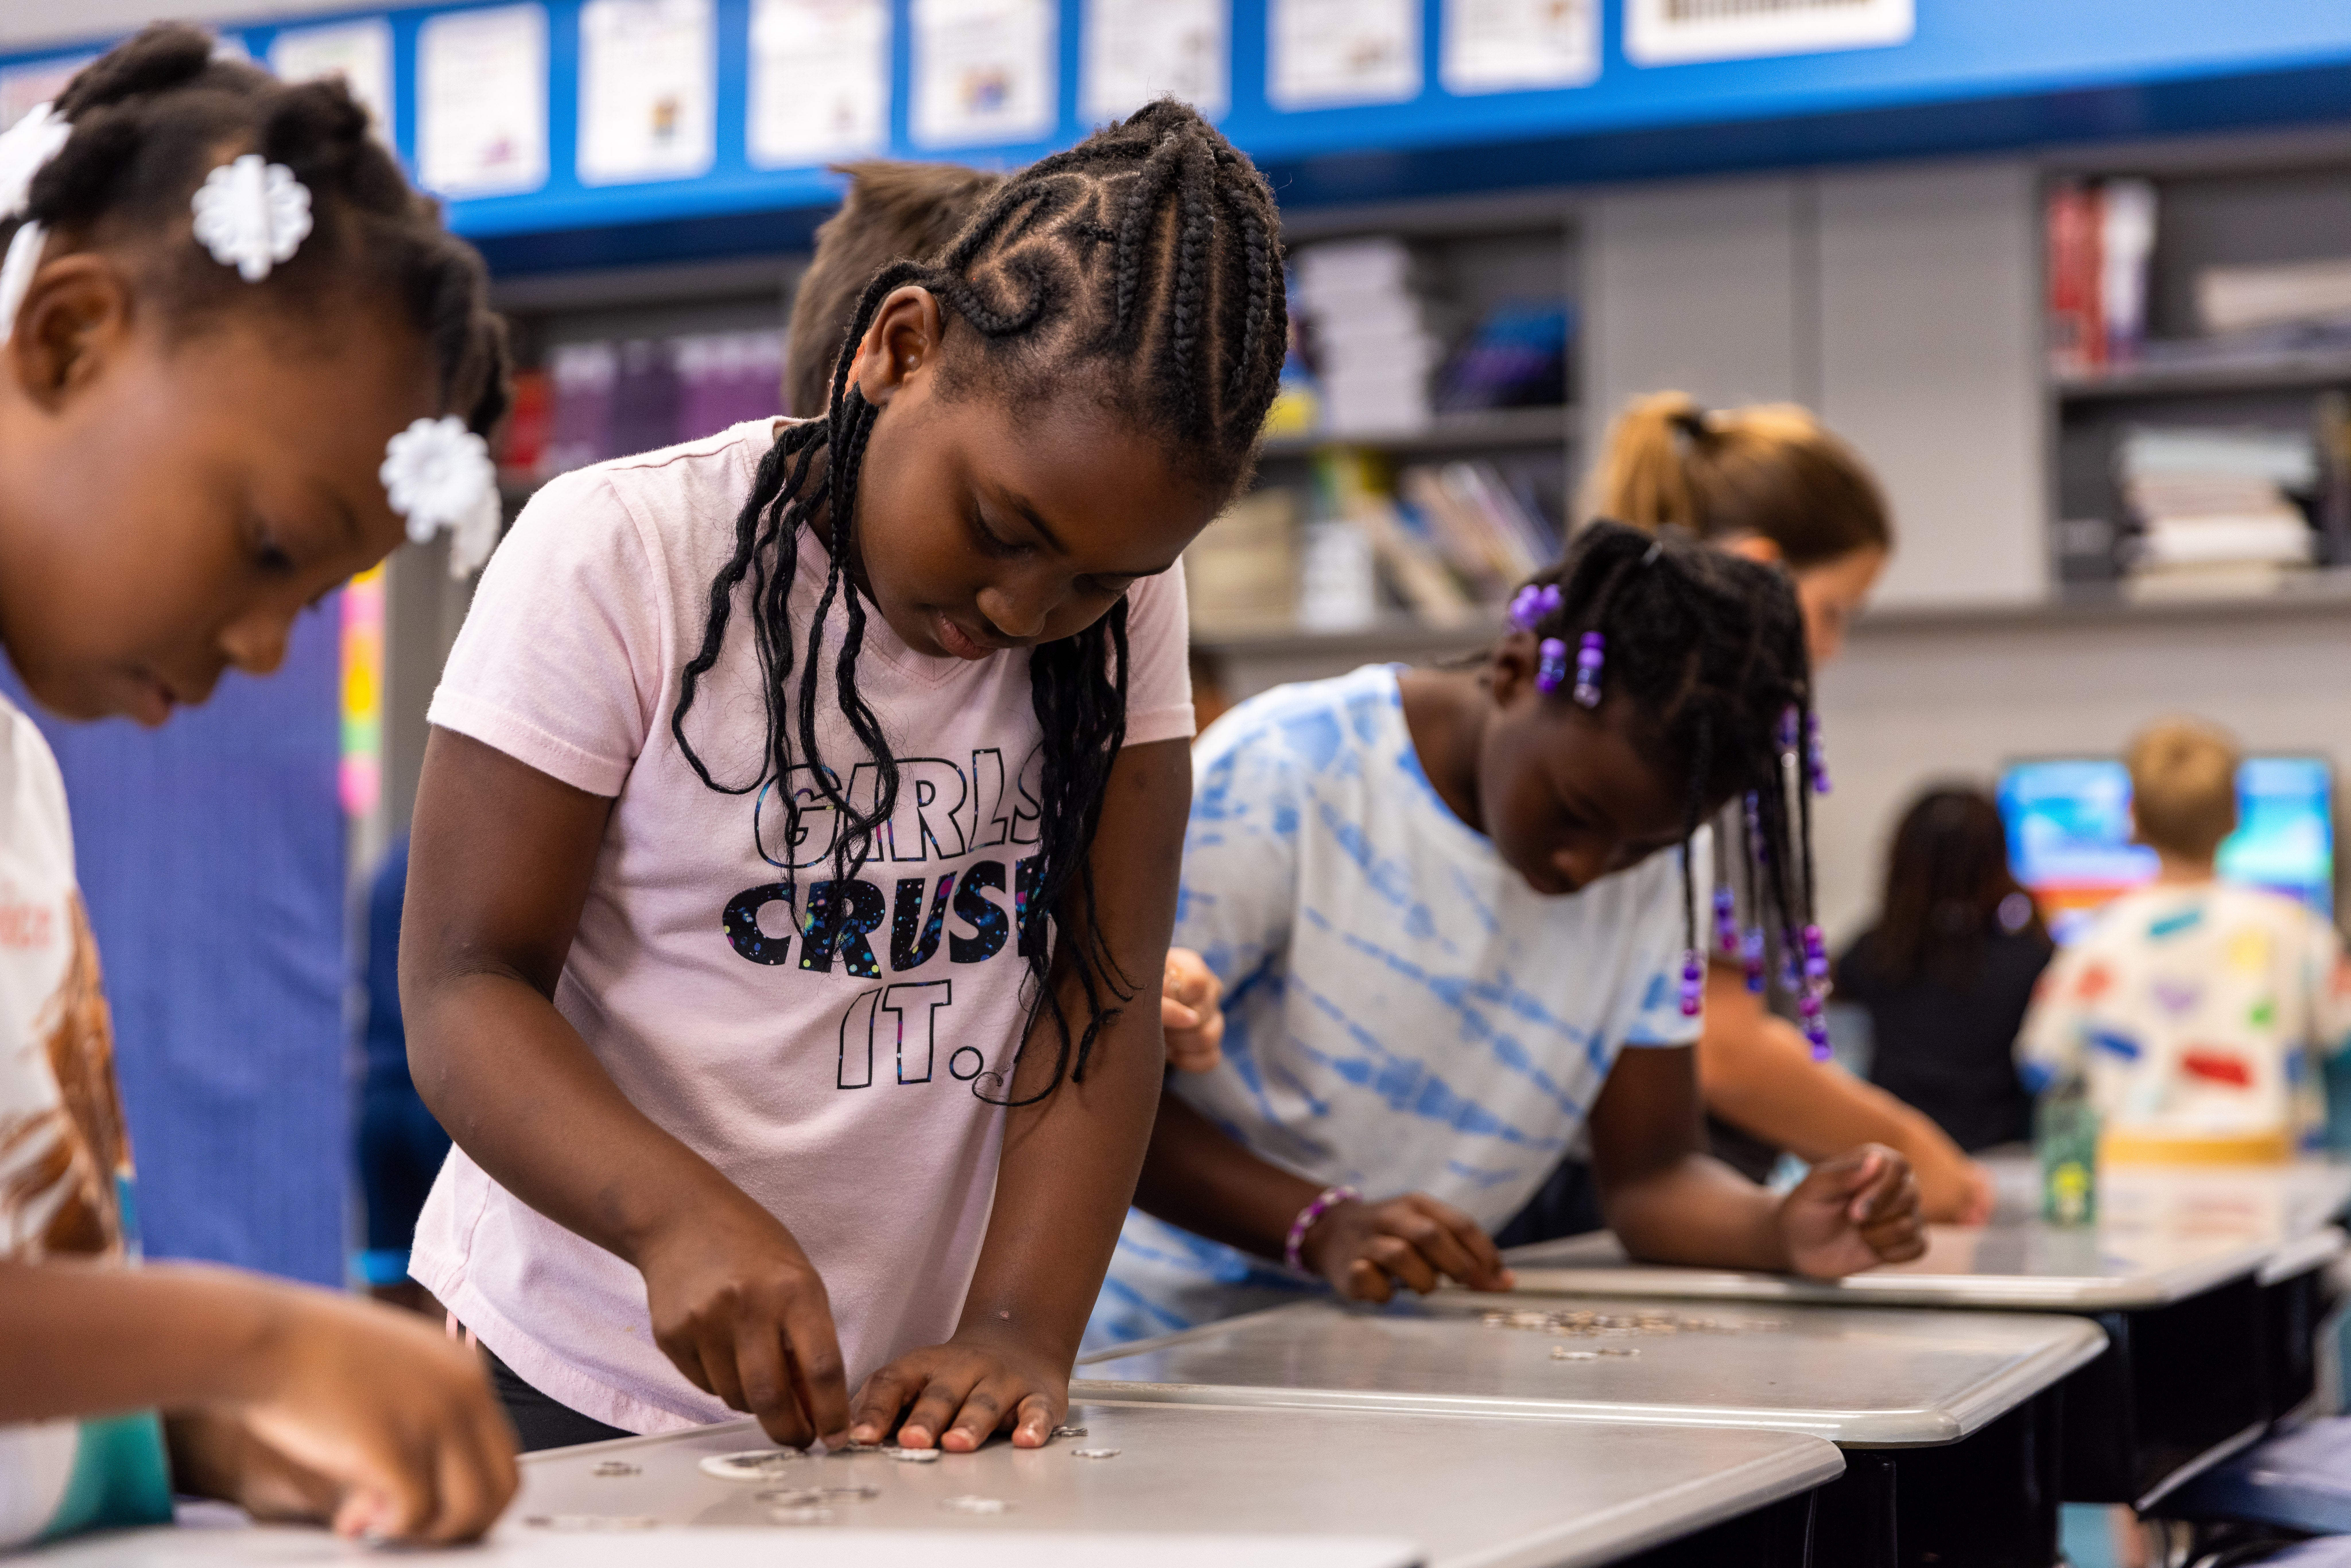 Children work on a crafts project during a summer program.